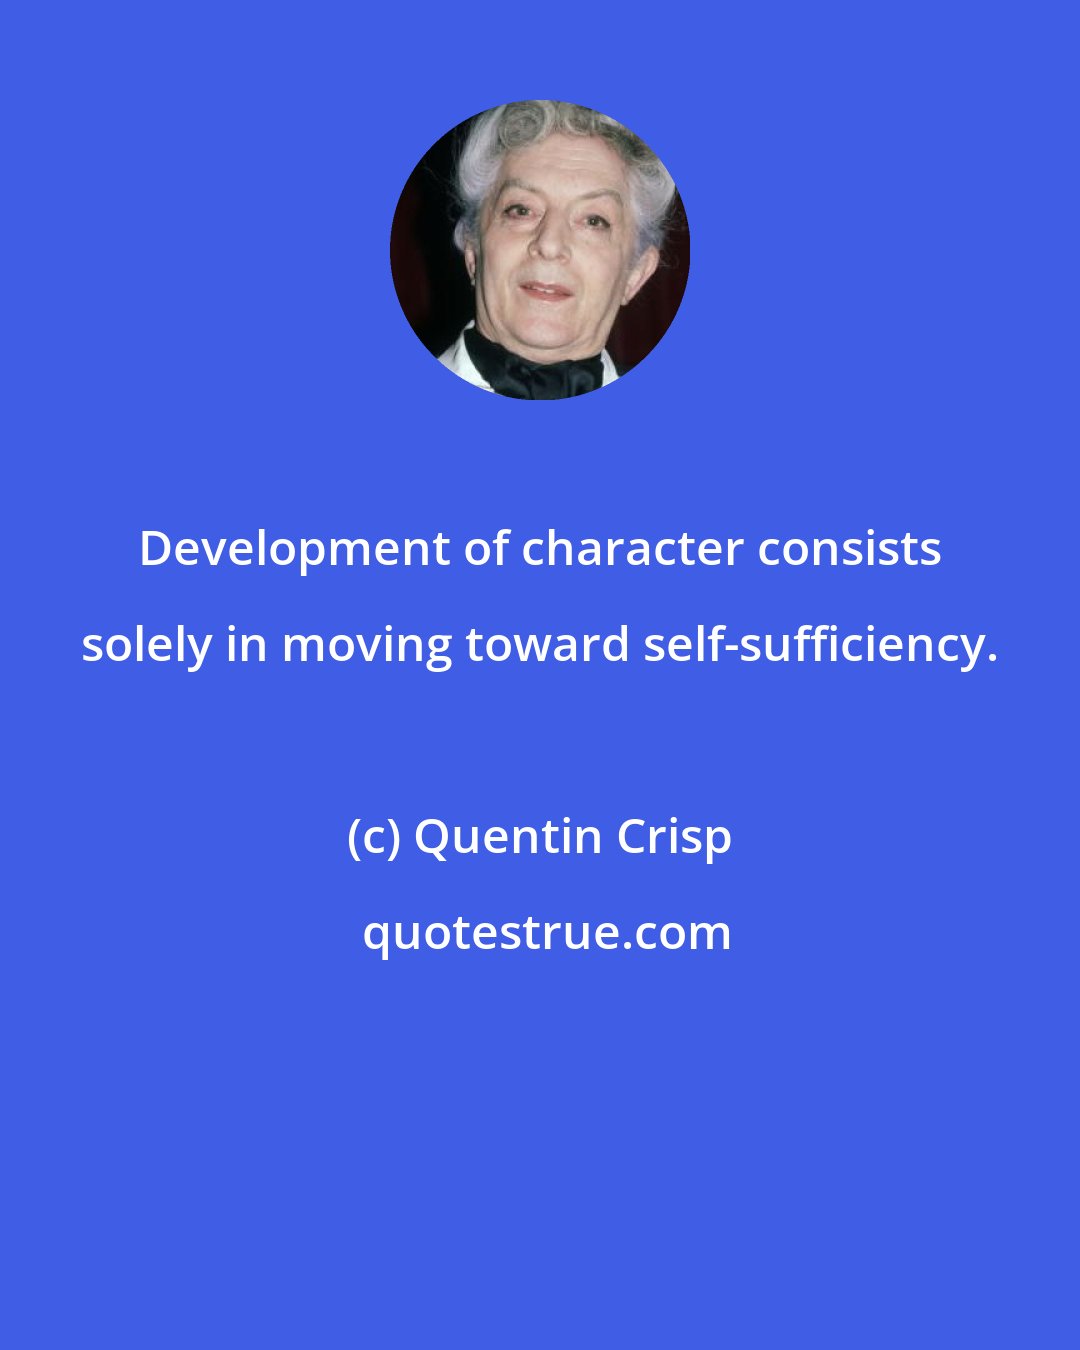 Quentin Crisp: Development of character consists solely in moving toward self-sufficiency.